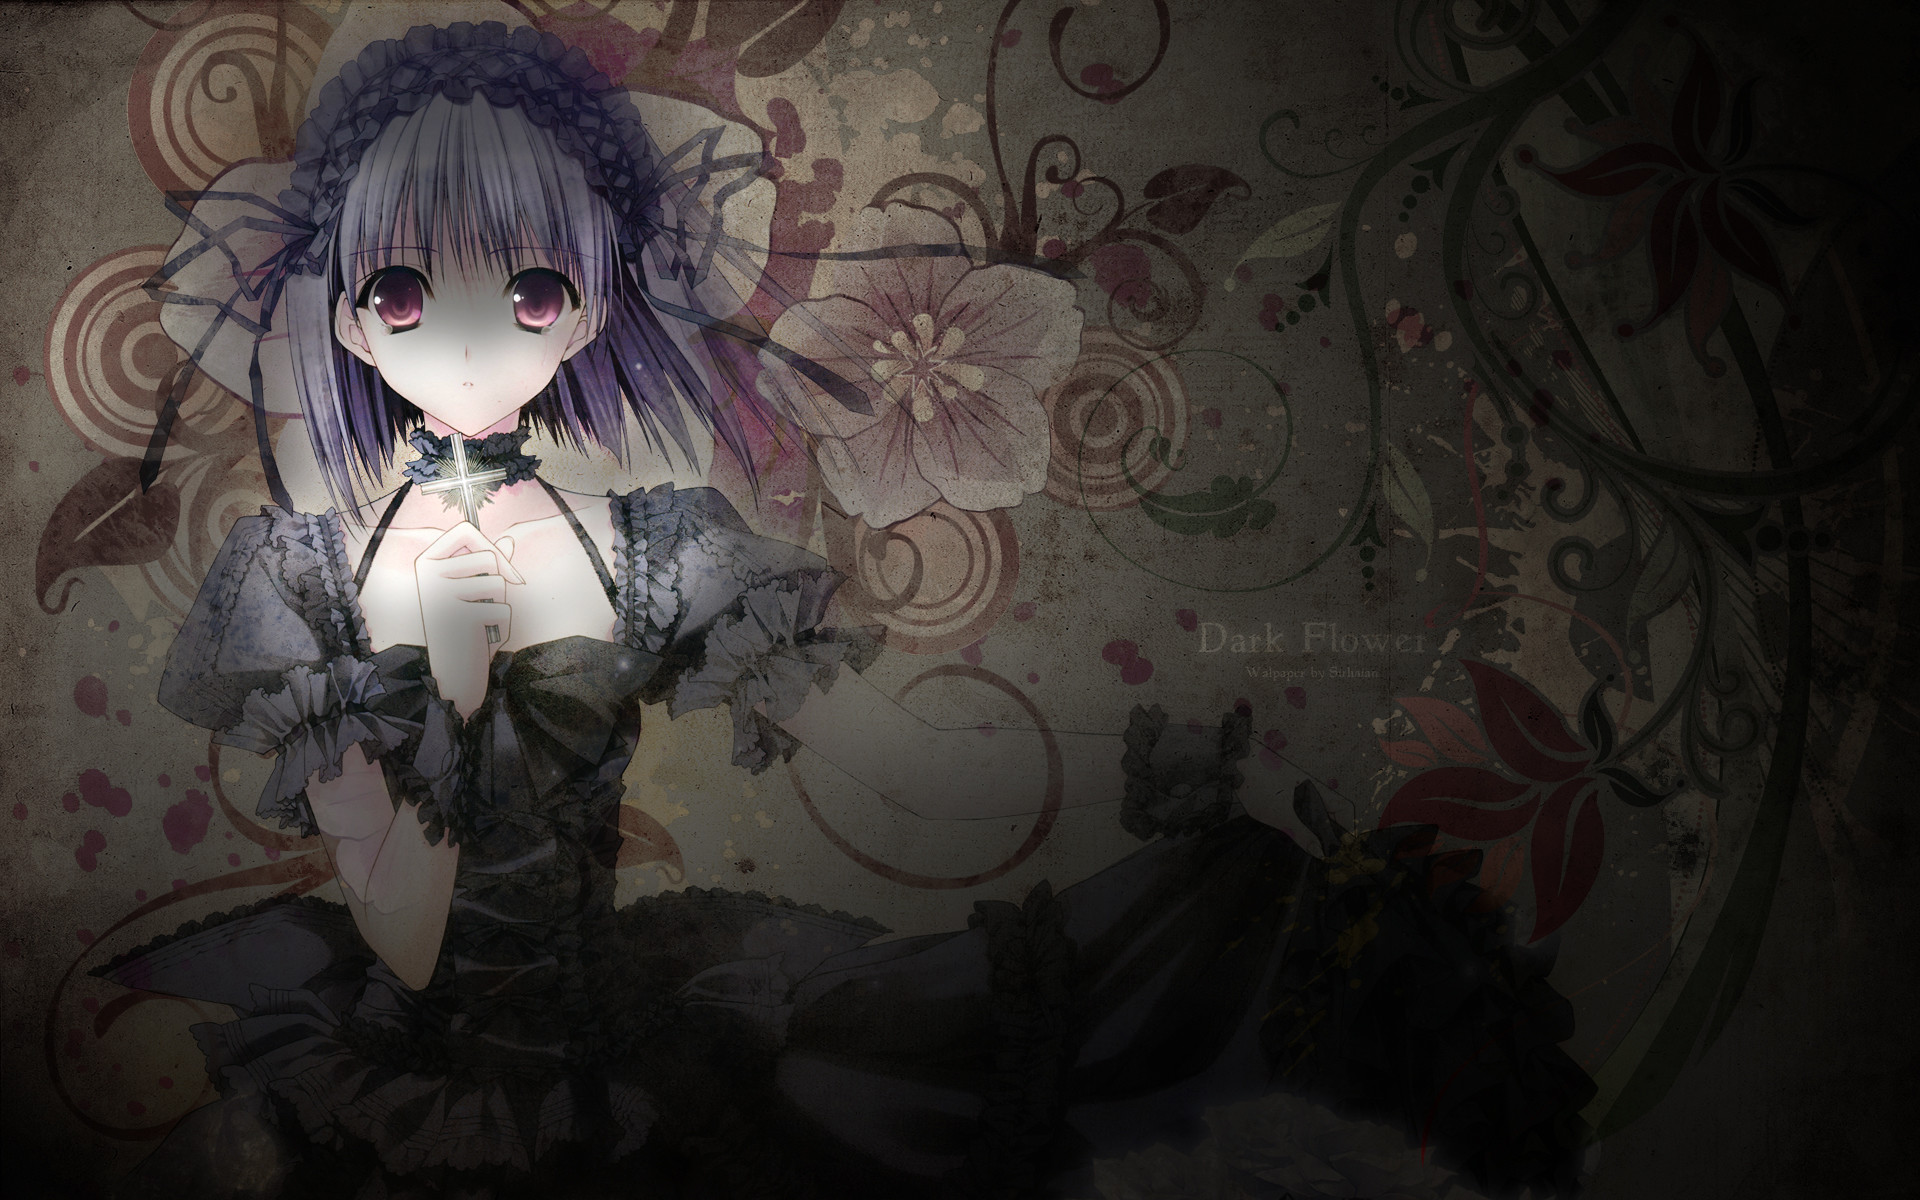 1920x1200 Anime Gothic Girl Flower wallpaper from Gothic Girls wallpapers